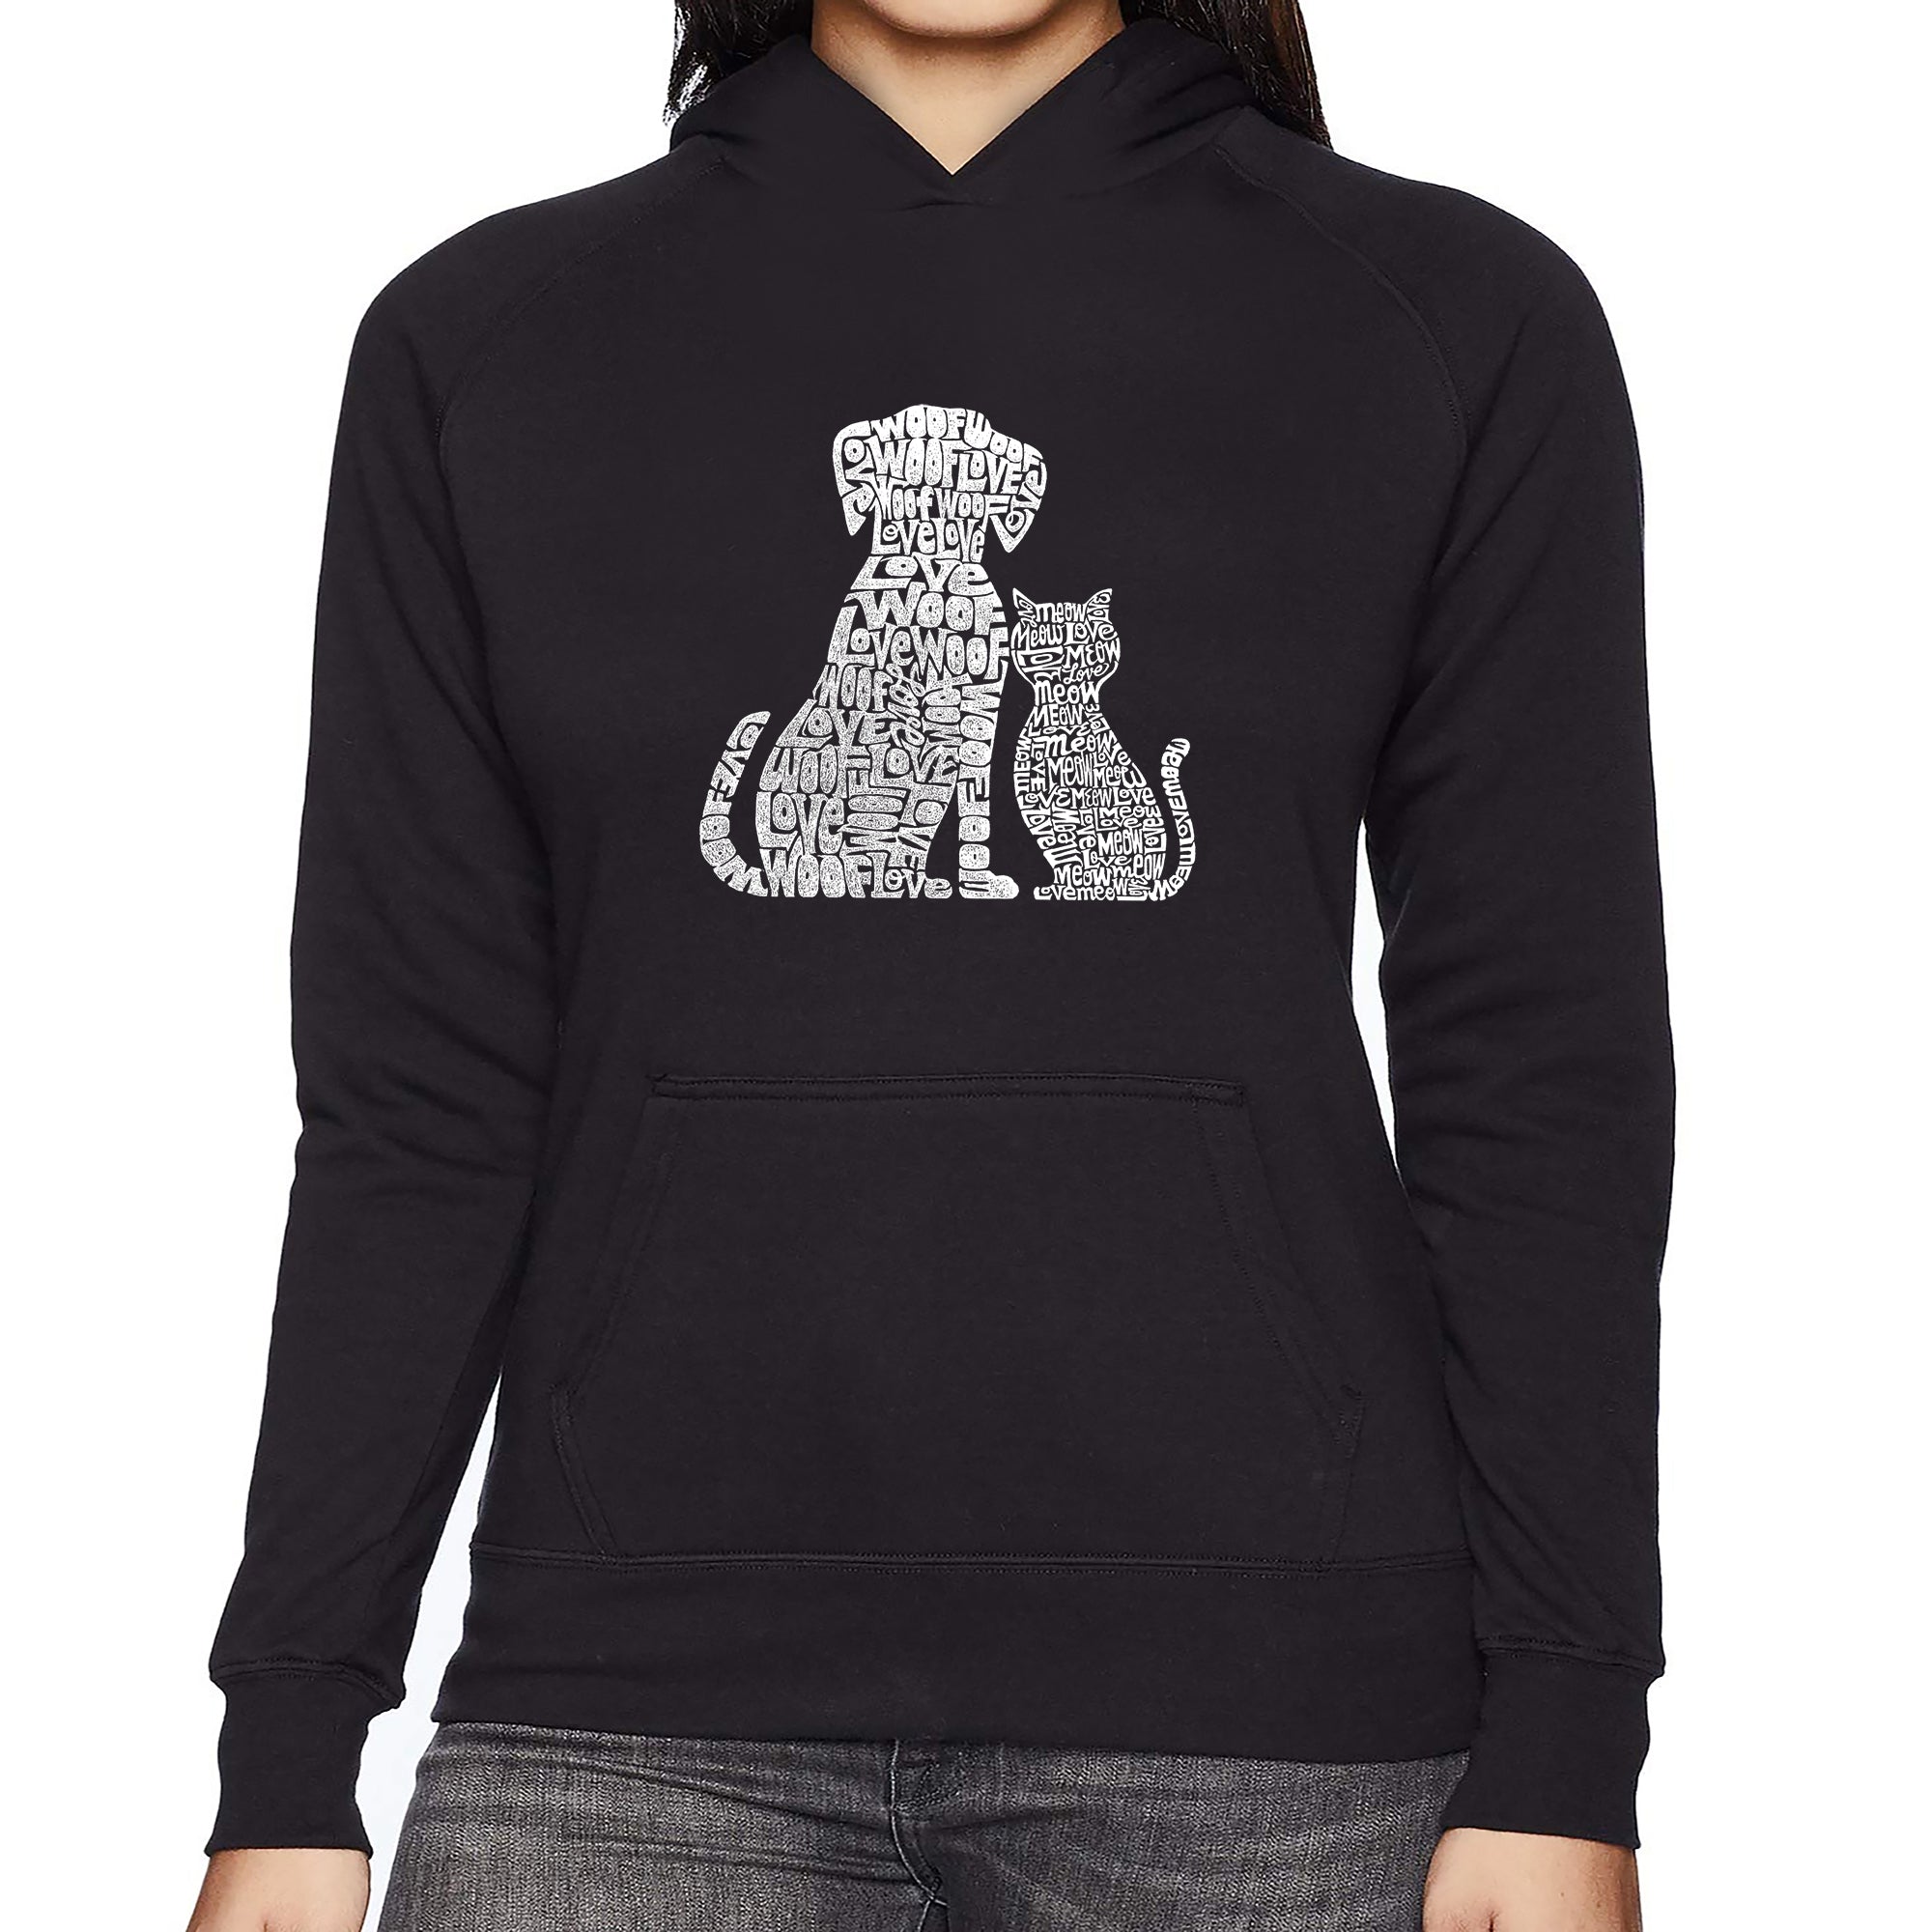 Dogs And Cats - Women's Word Art Hooded Sweatshirt - Black - XXXX-Large